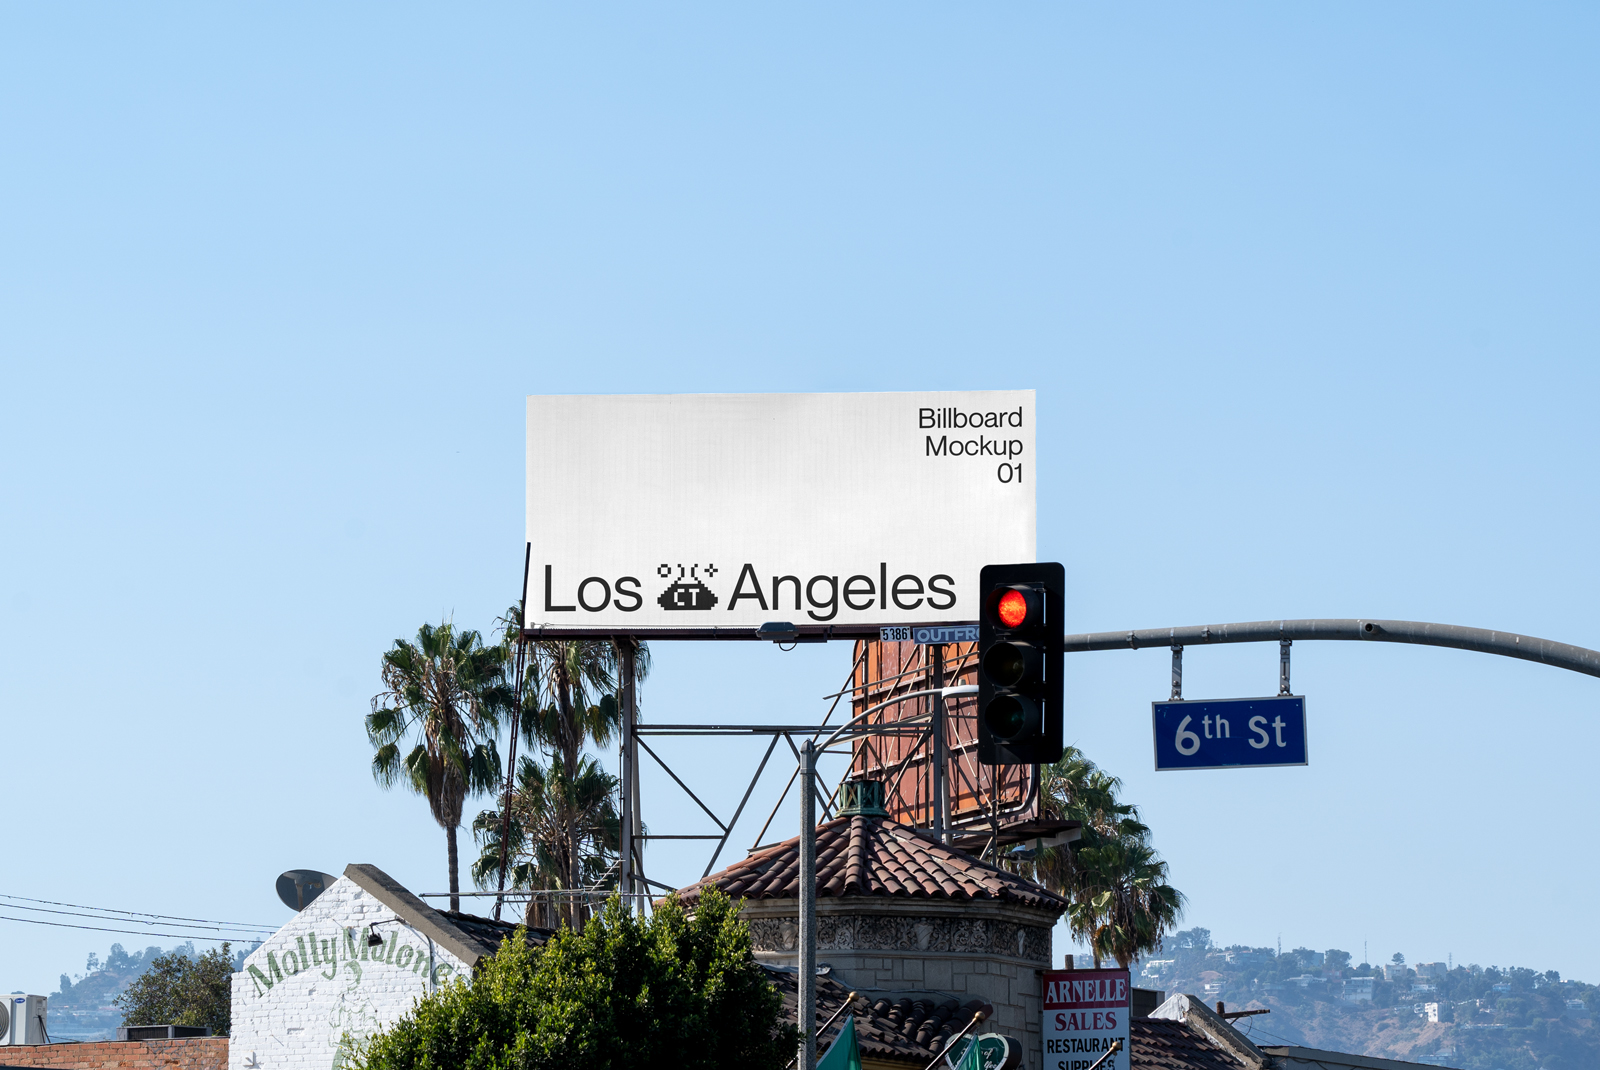 Outdoor billboard mockup on Los Angeles street, sunny day, clear blue sky, with palm trees and traffic light, suitable for ad design display.